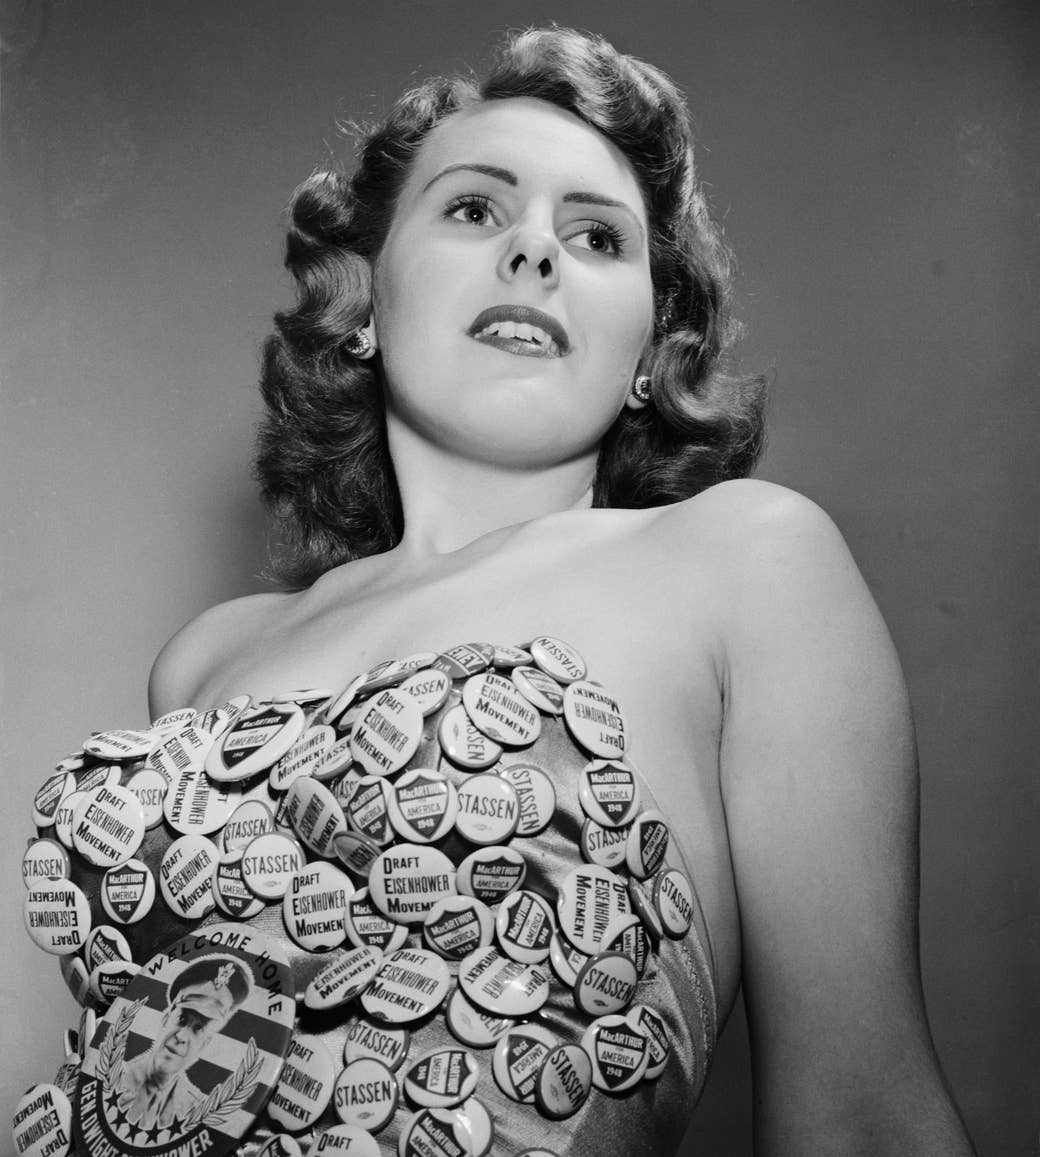 A woman looking into the distance over the camera wears a multitude of campaign pins fixed to her bathing suit that read &quot;draft Eisenhower movement&quot; and the name &quot;Stassen&quot;